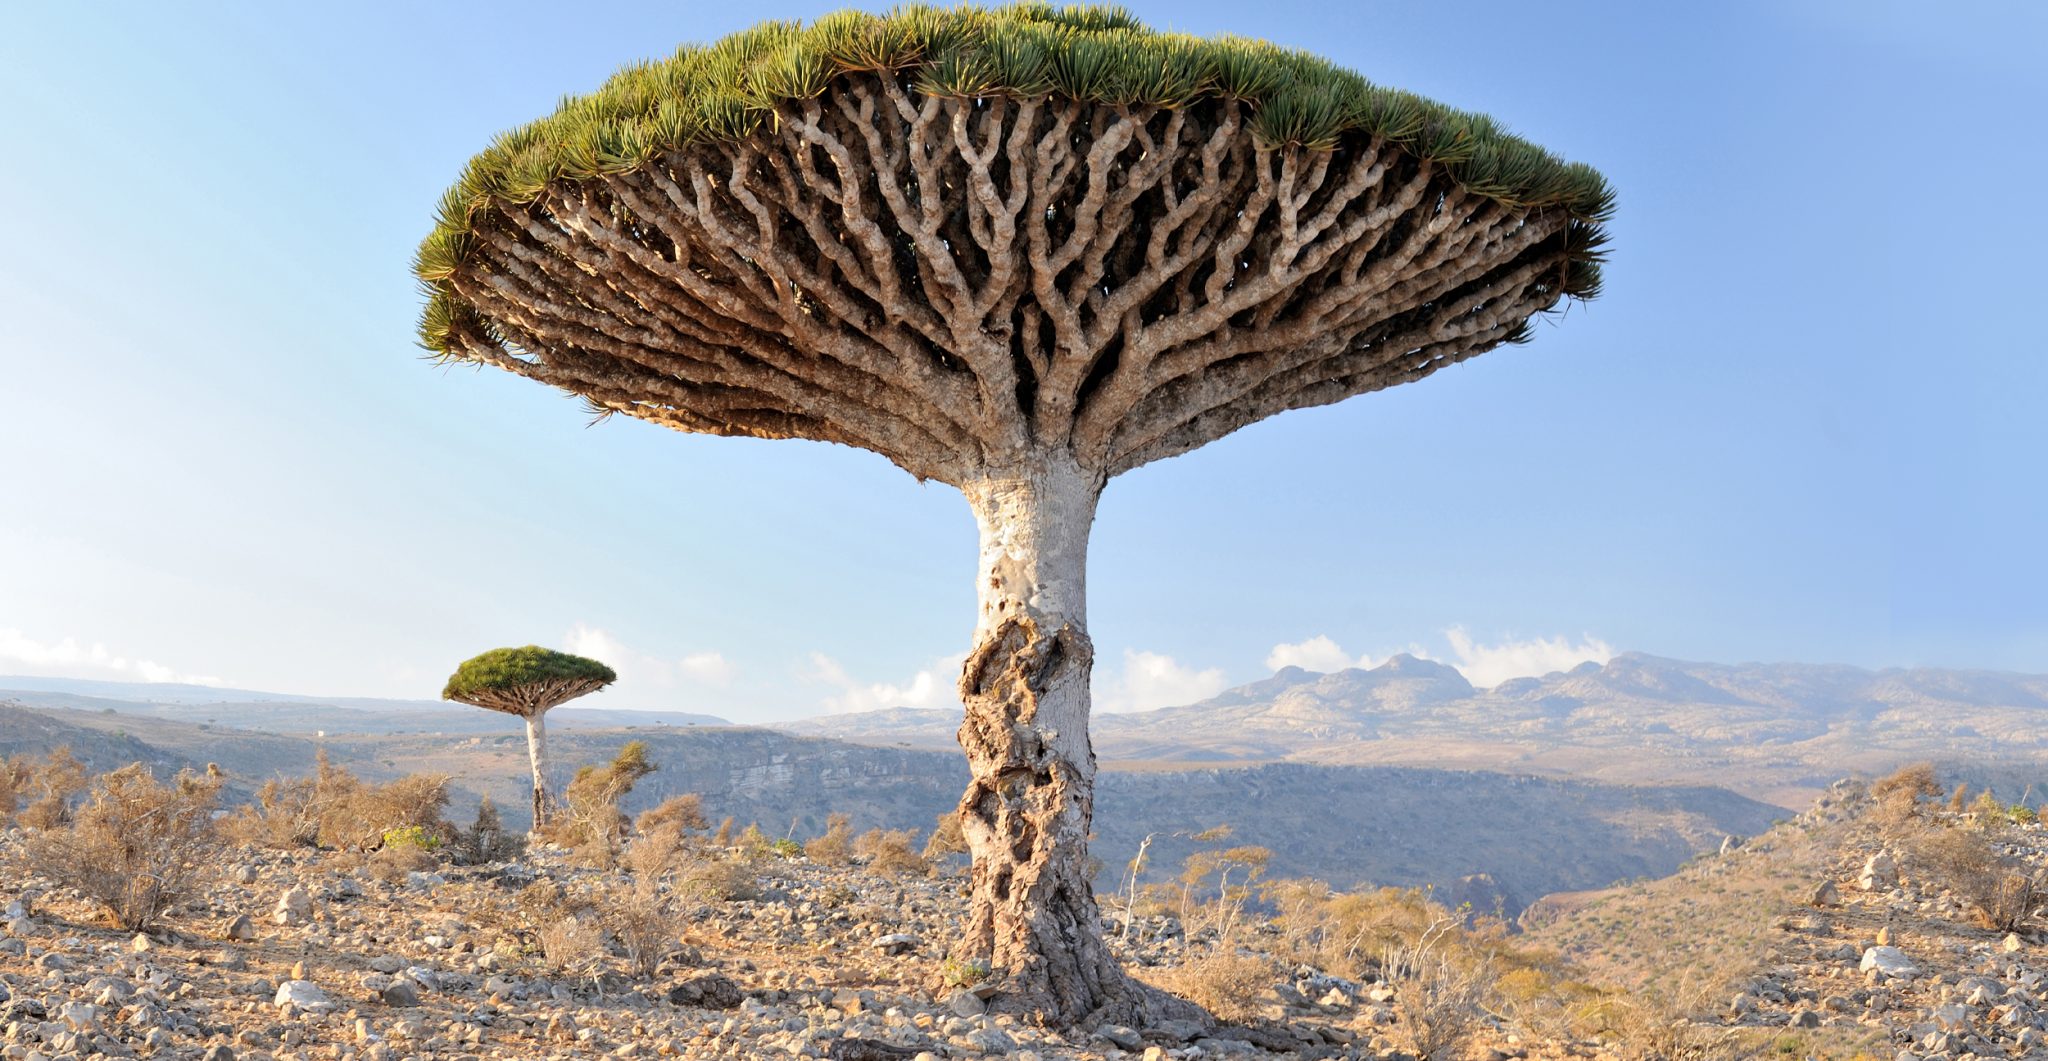 The Lost World Of Socotra One Of The Most Alien Looking Places On Earth